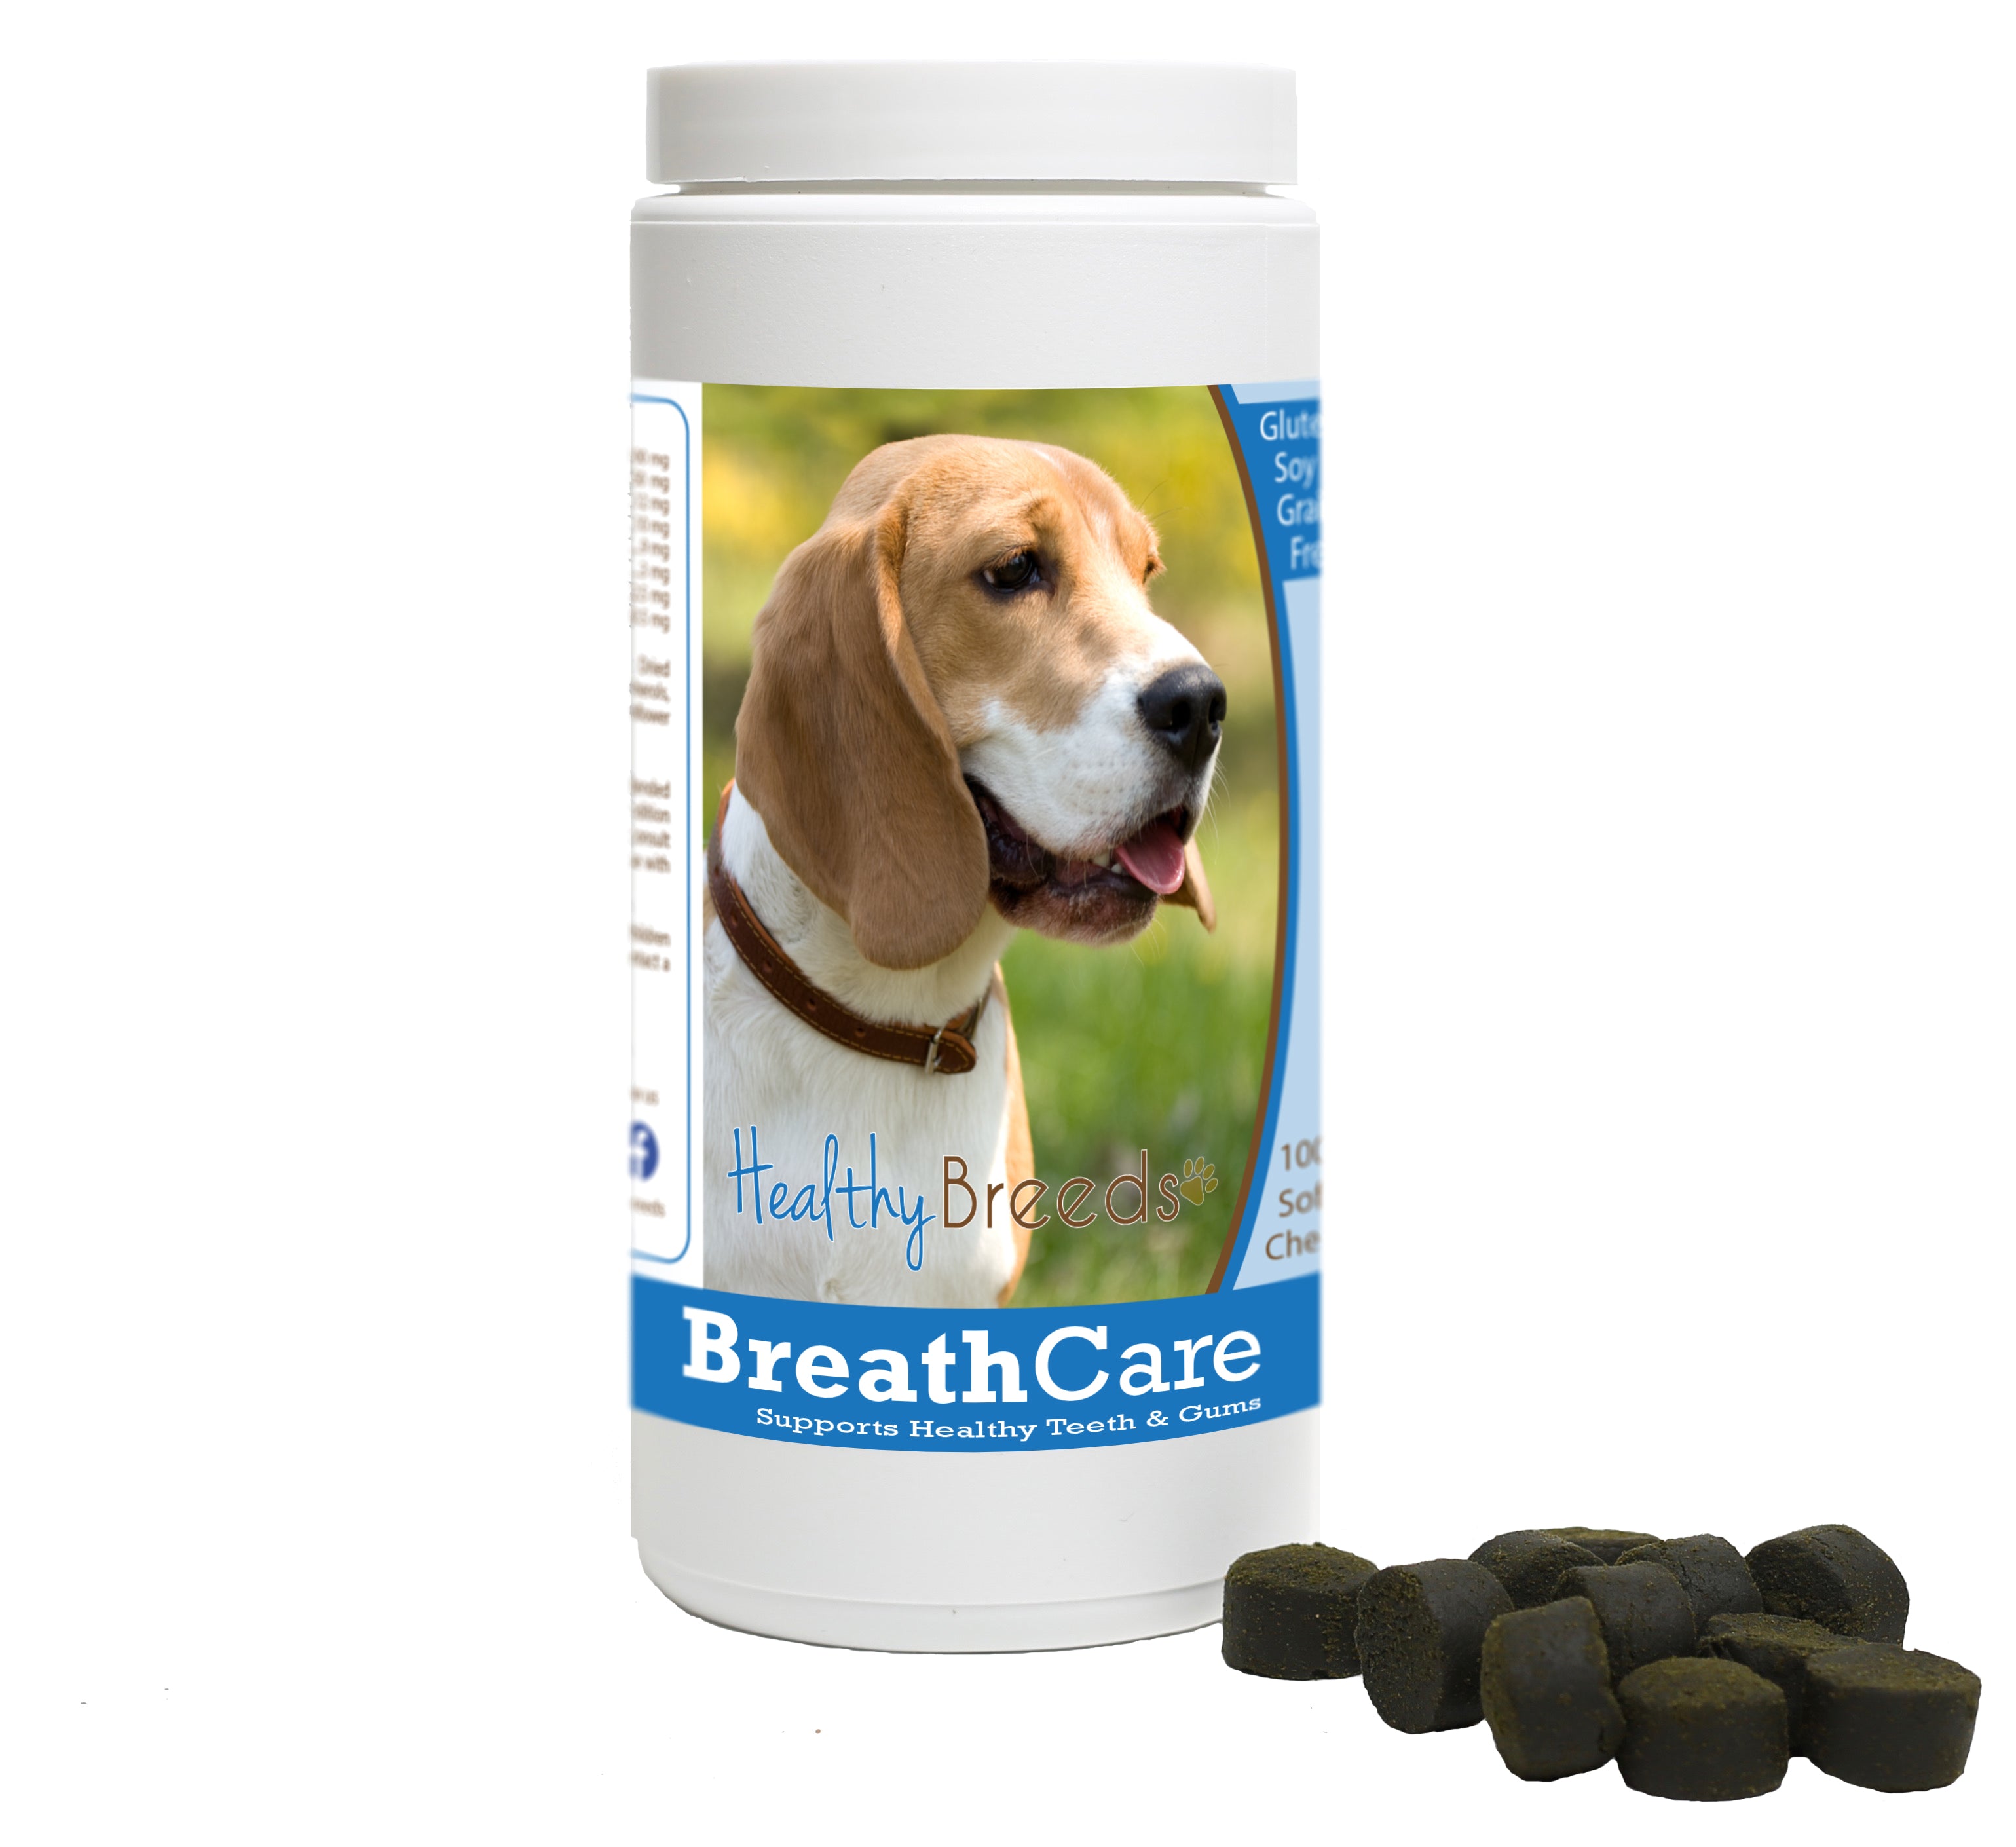 Beagle Breath Care Soft Chews for Dogs 100 Count